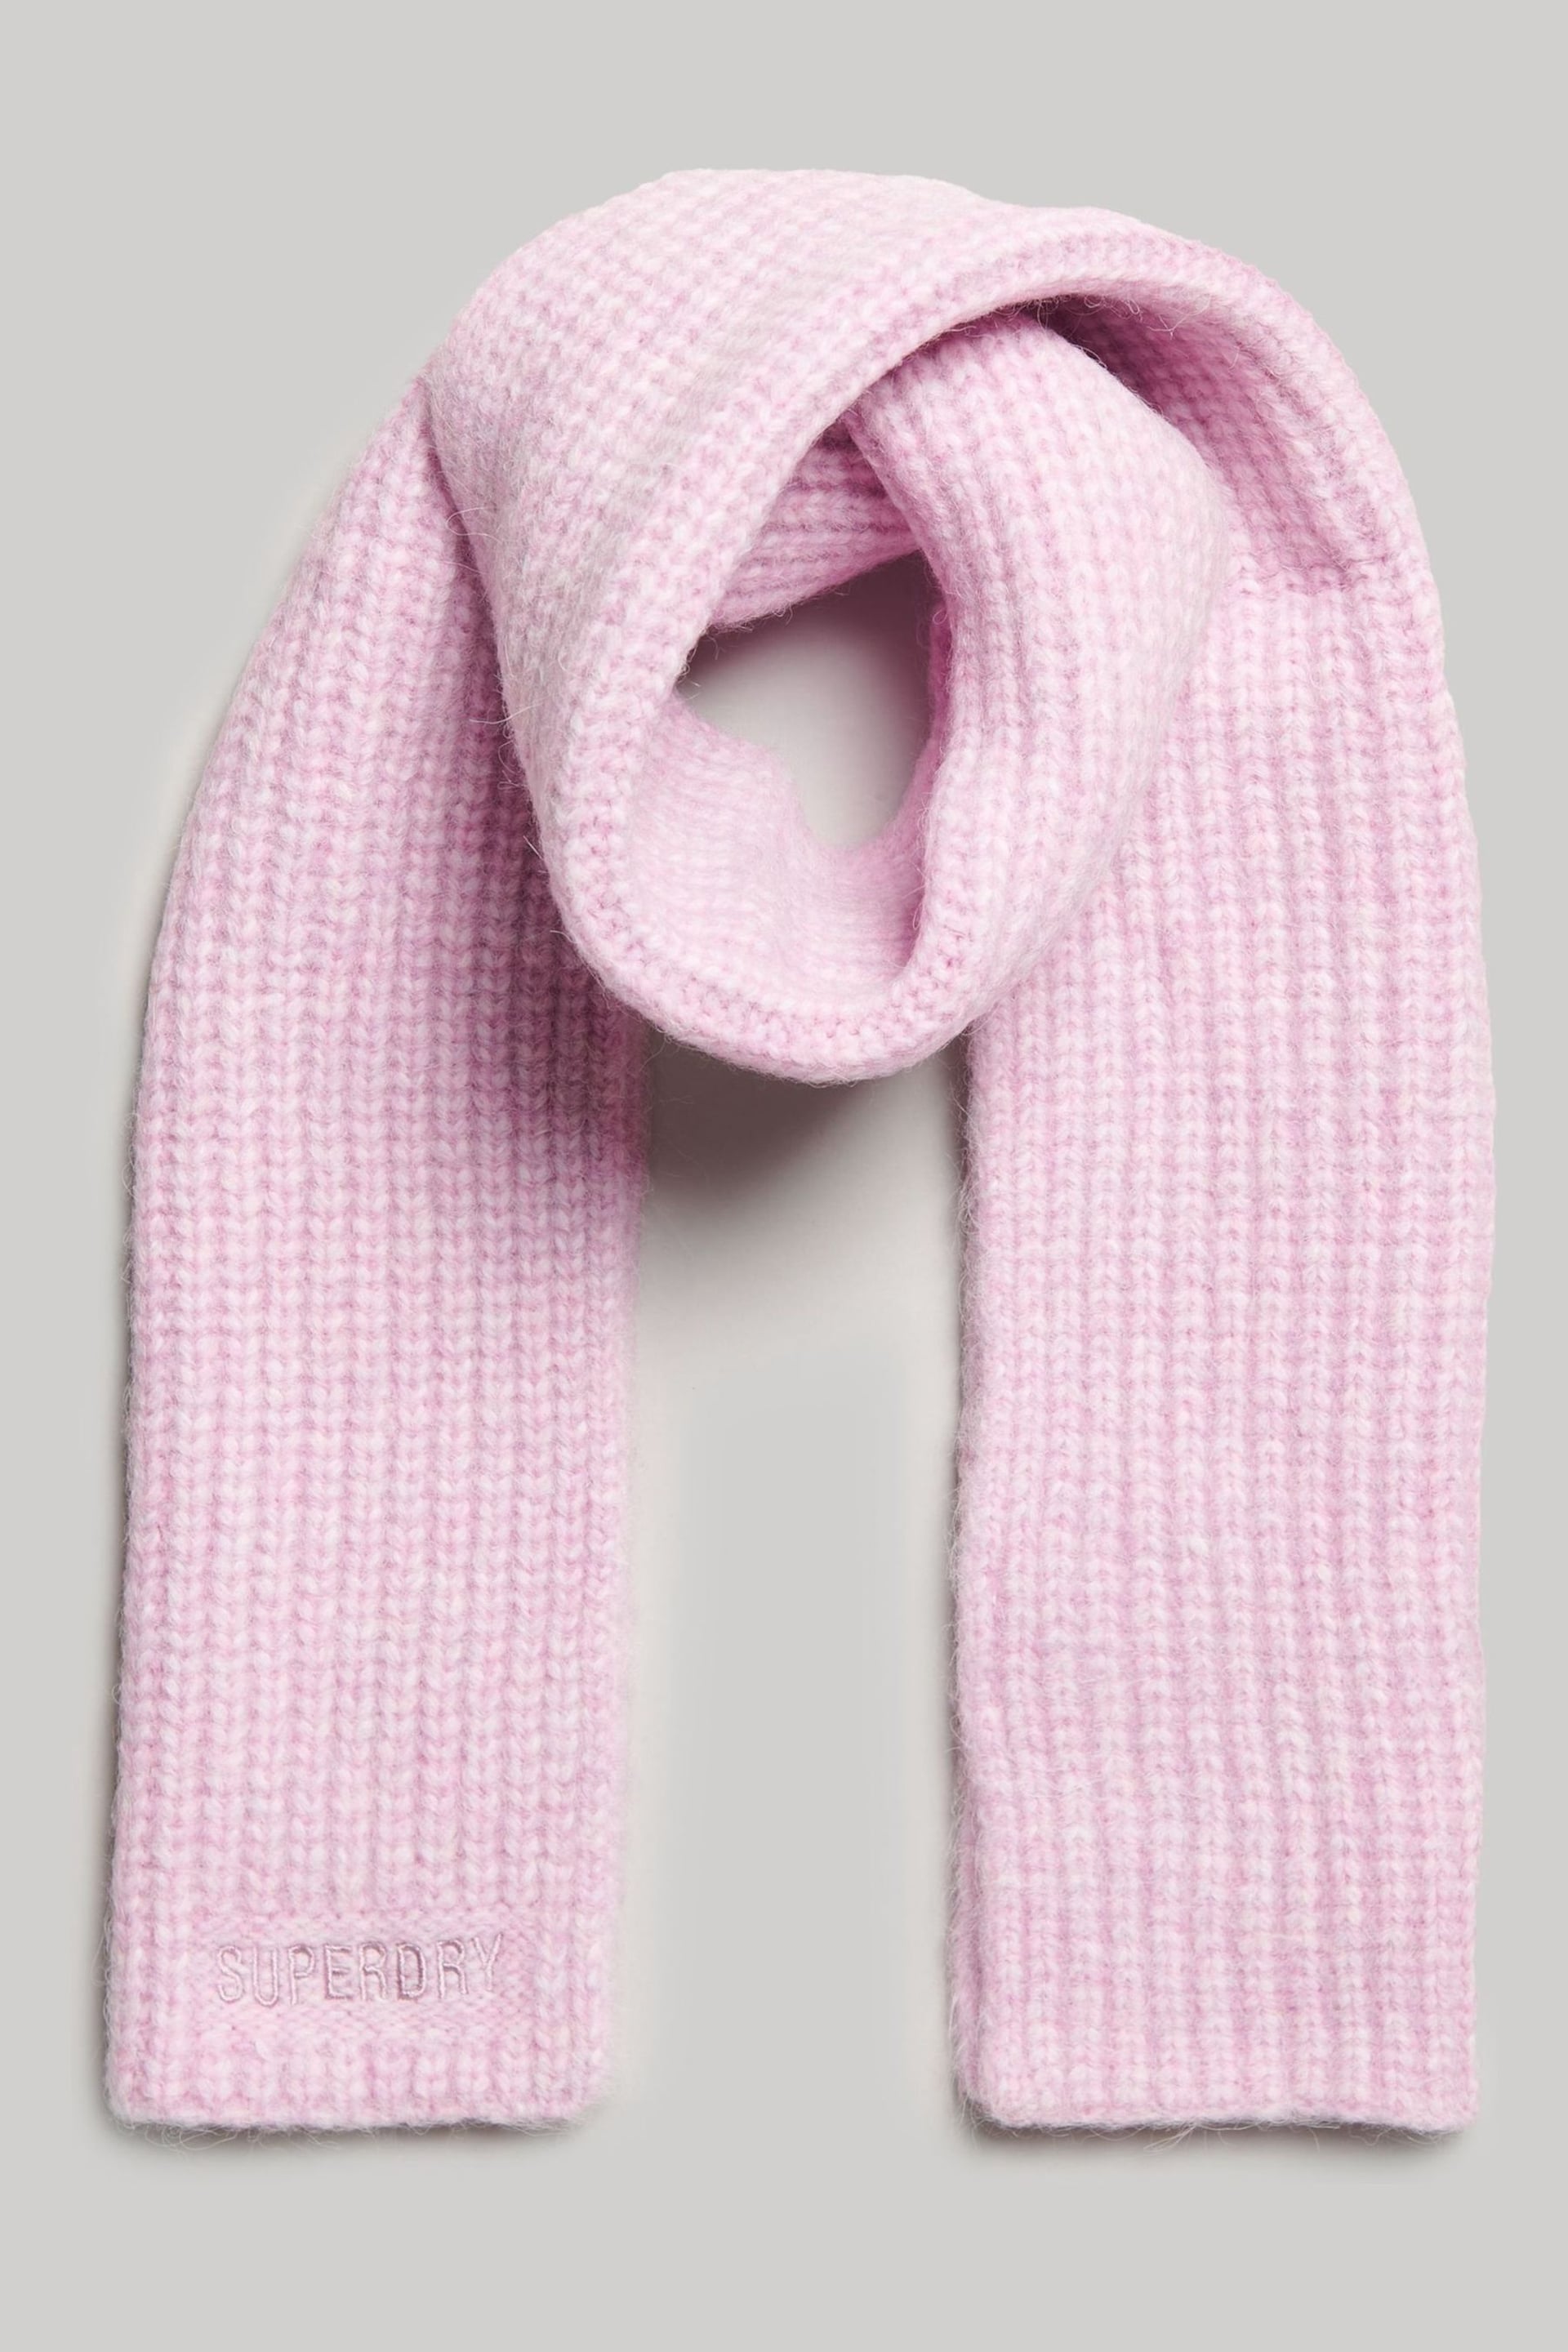 Superdry Pink Essential Ribbed Scarf - Image 2 of 3